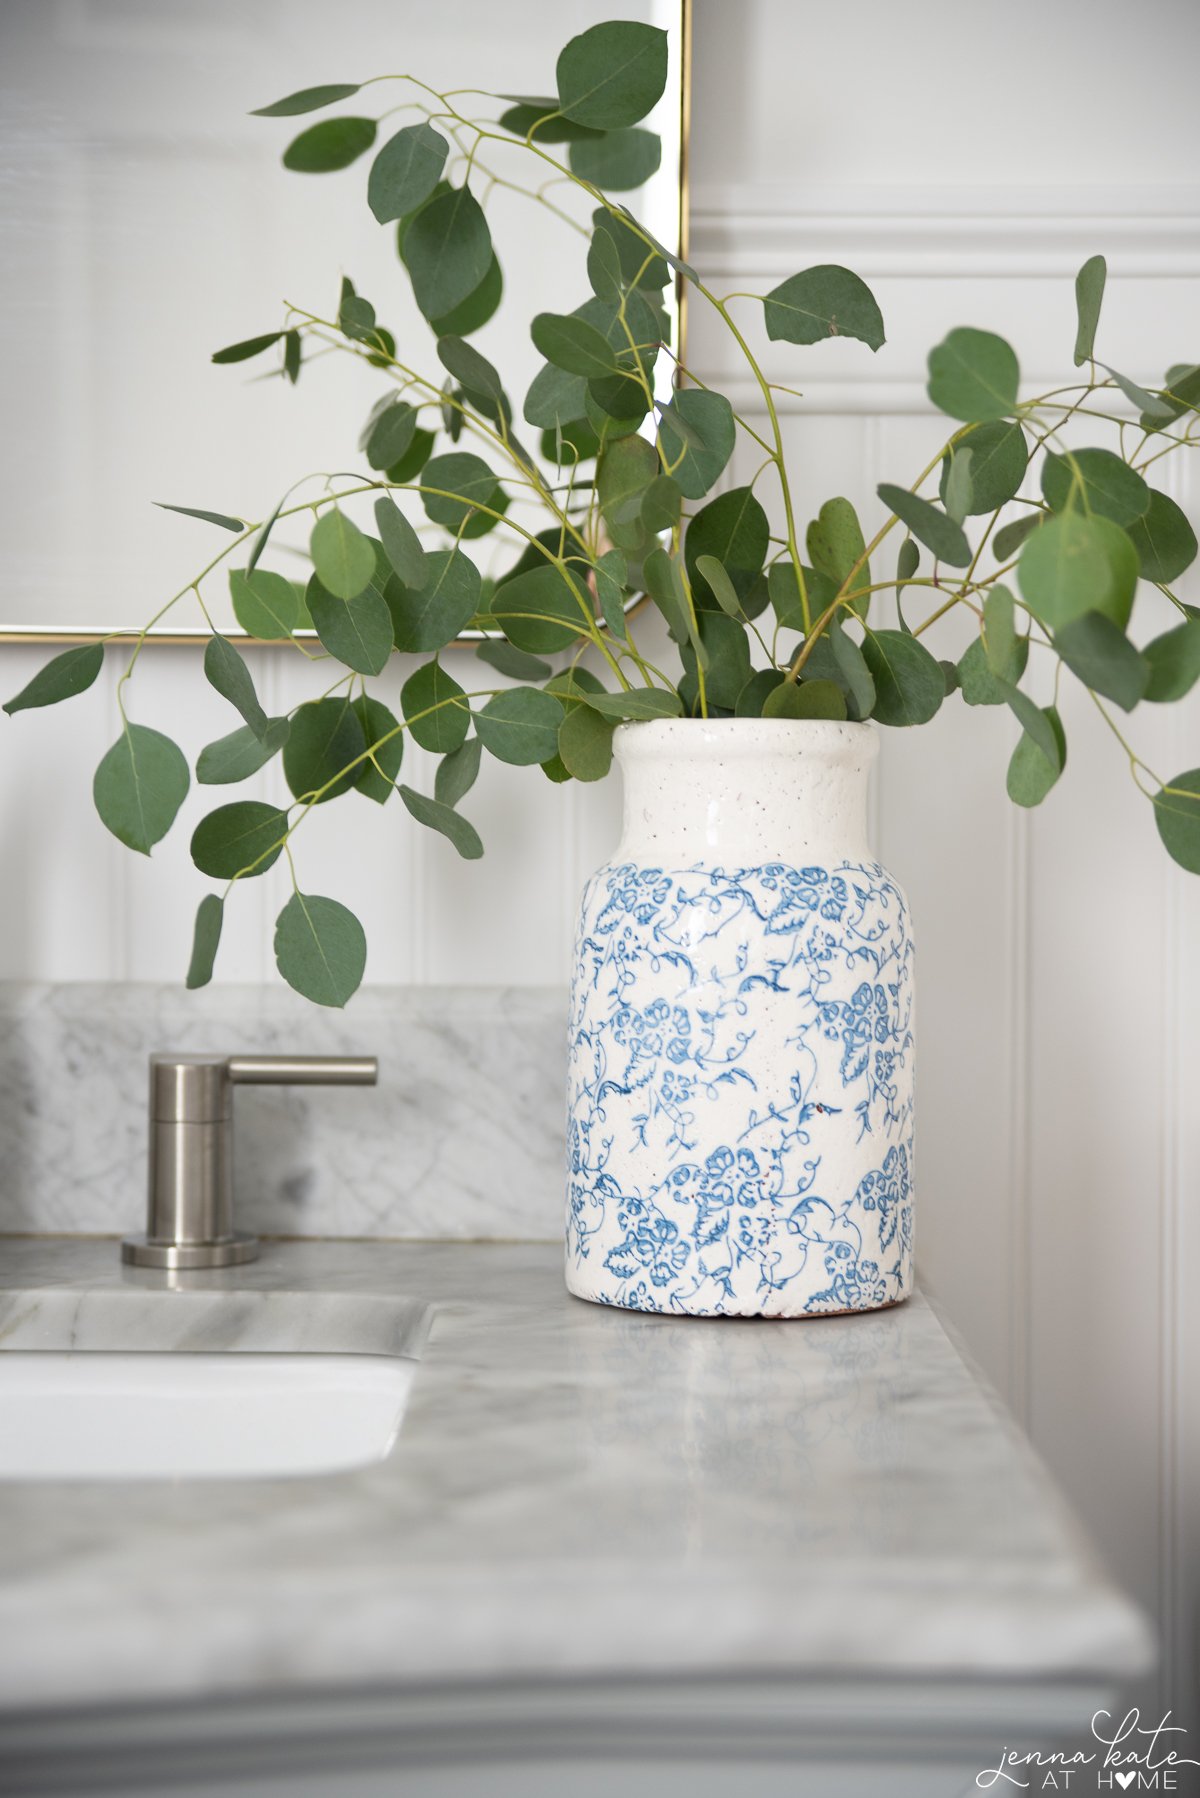 white and blue ceramic vase from Amazon on a bathroom countertop